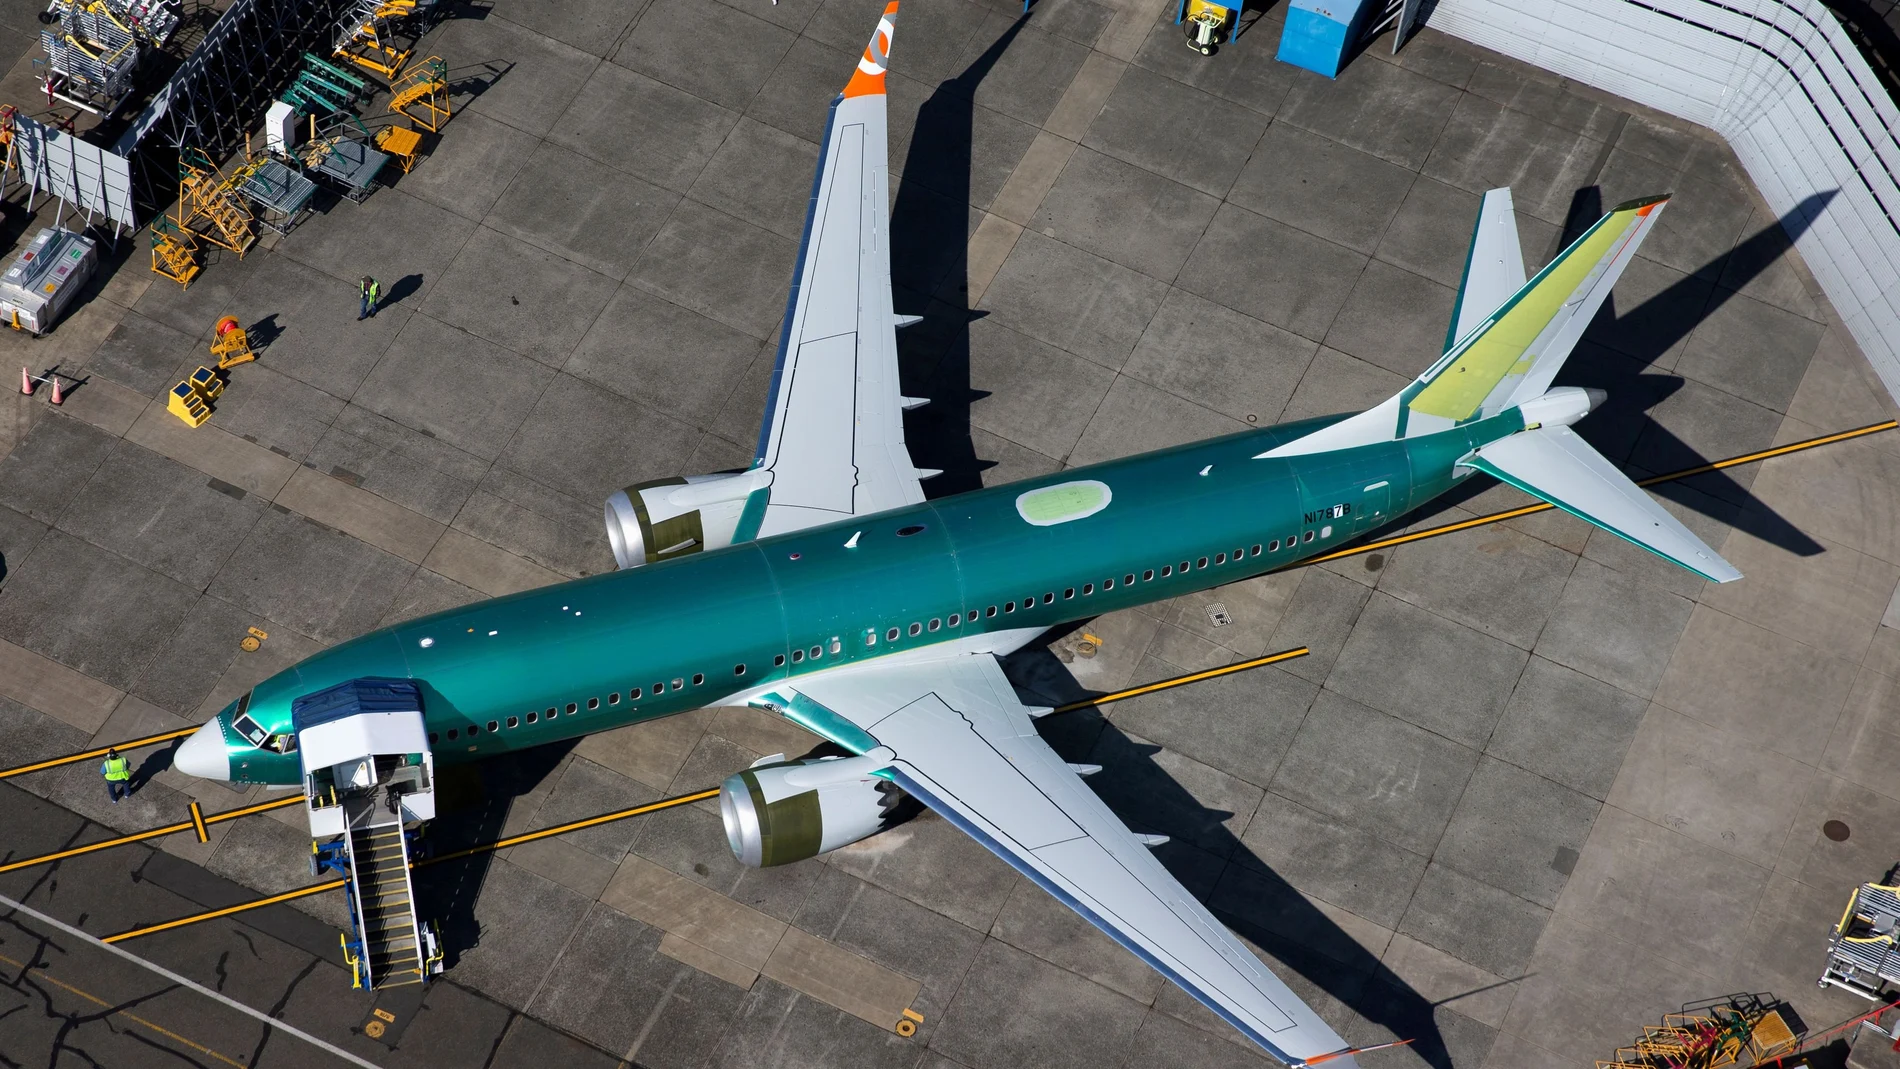 FILE PHOTO: An unpainted Boeing 737 MAX aircraft is seen parked in an aerial photo at Renton Municipal Airport near the Boeing Renton facility in Renton